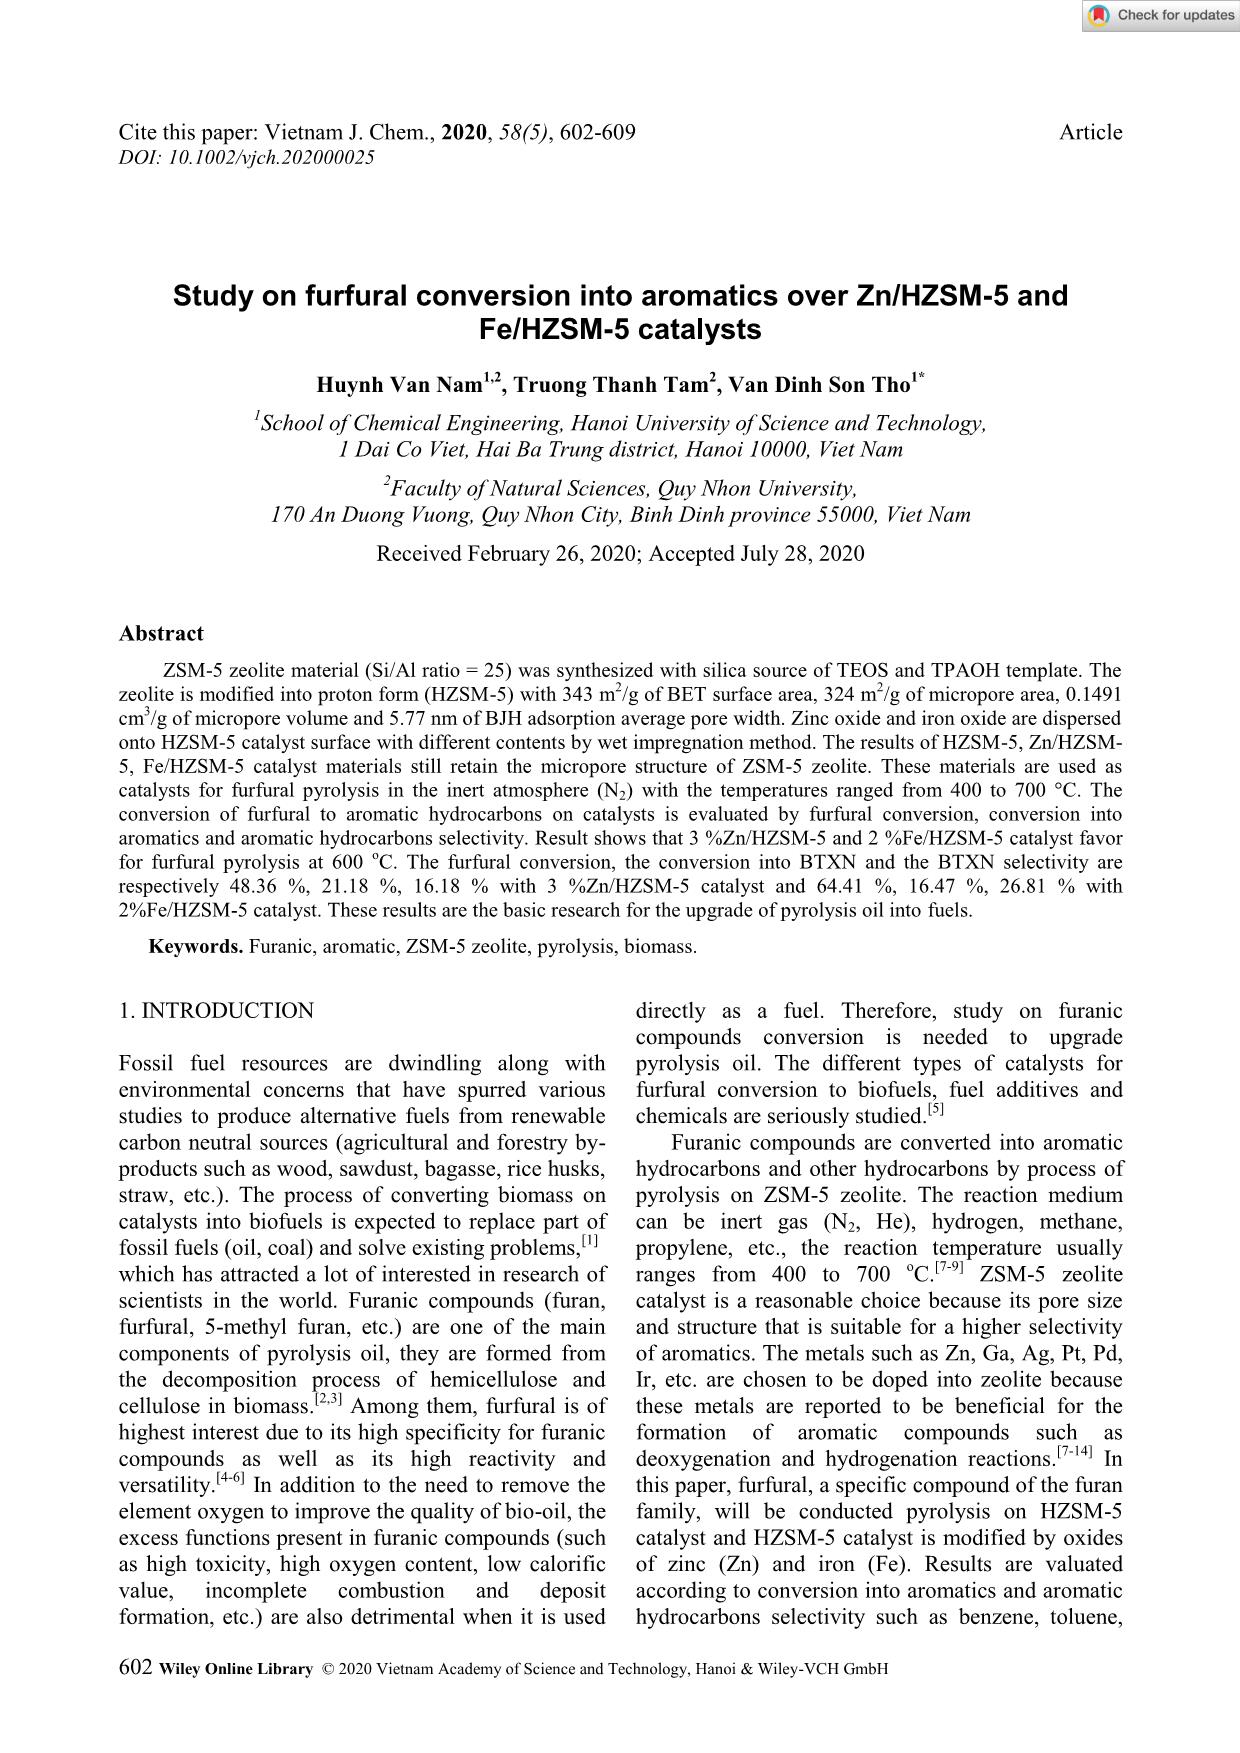 Study on furfural conversion into aromatics over Zn/HZSM-5 and Fe/HZSM-5 catalysts trang 1